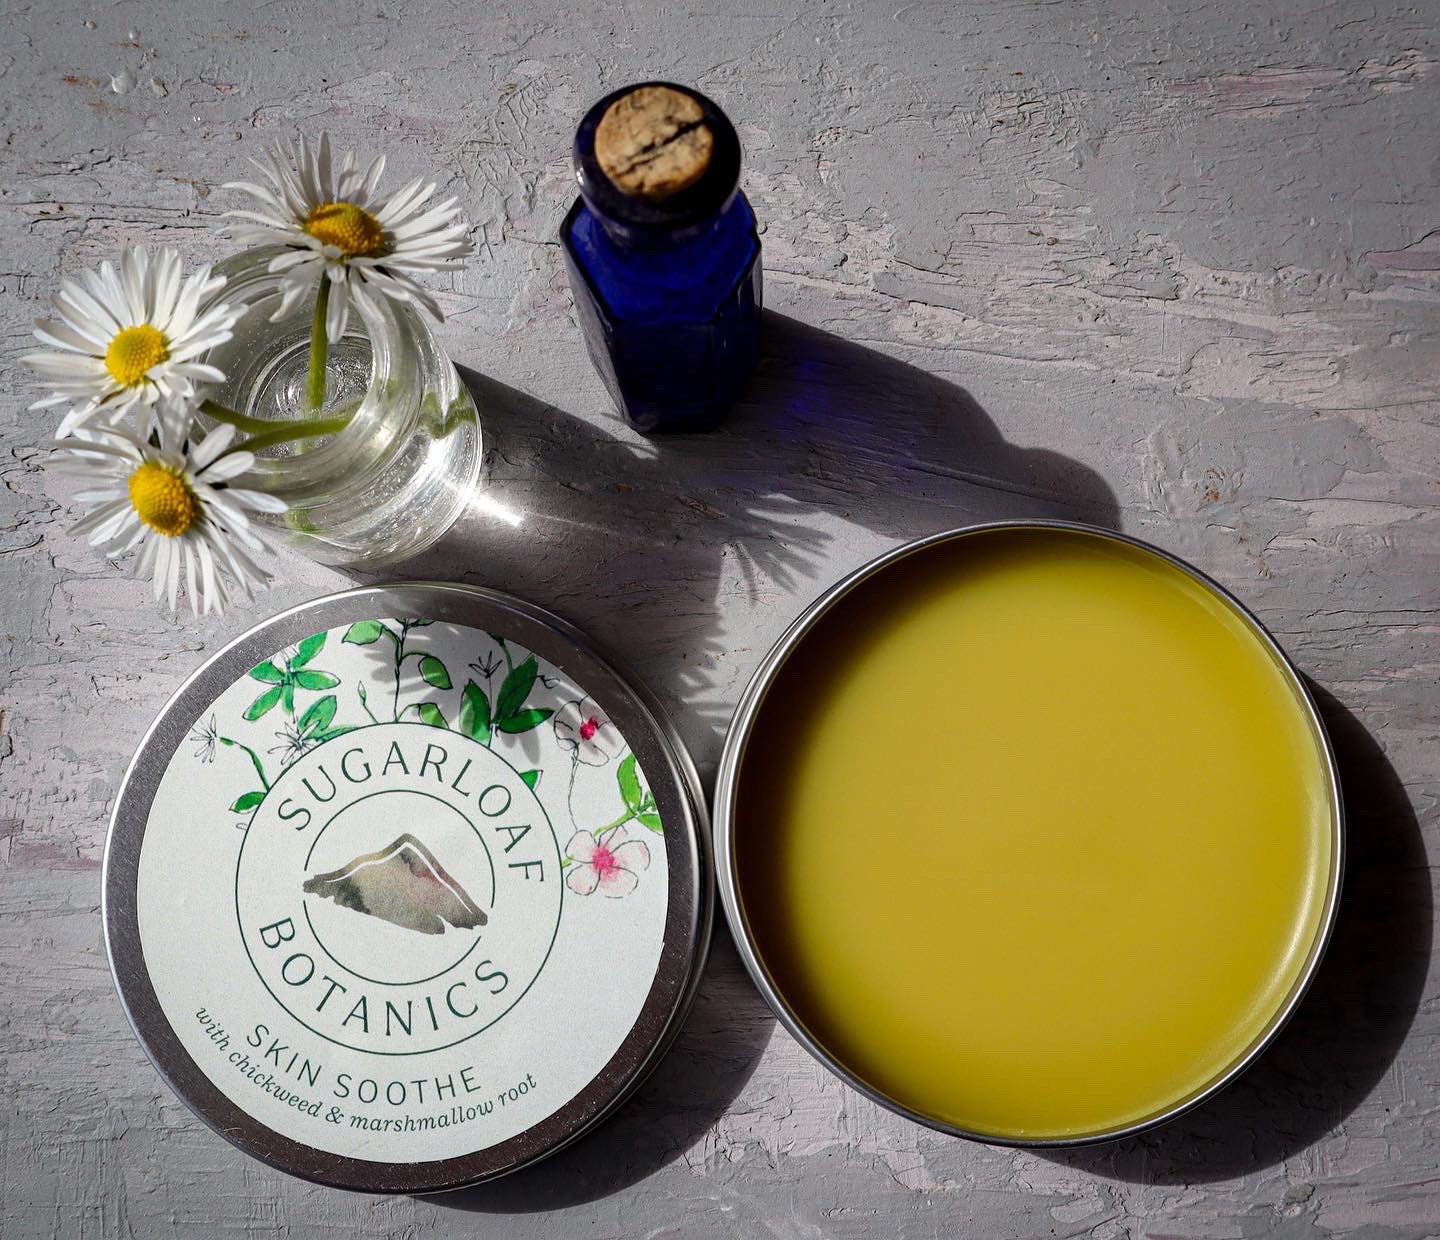 Chickweed and marshmallow salve